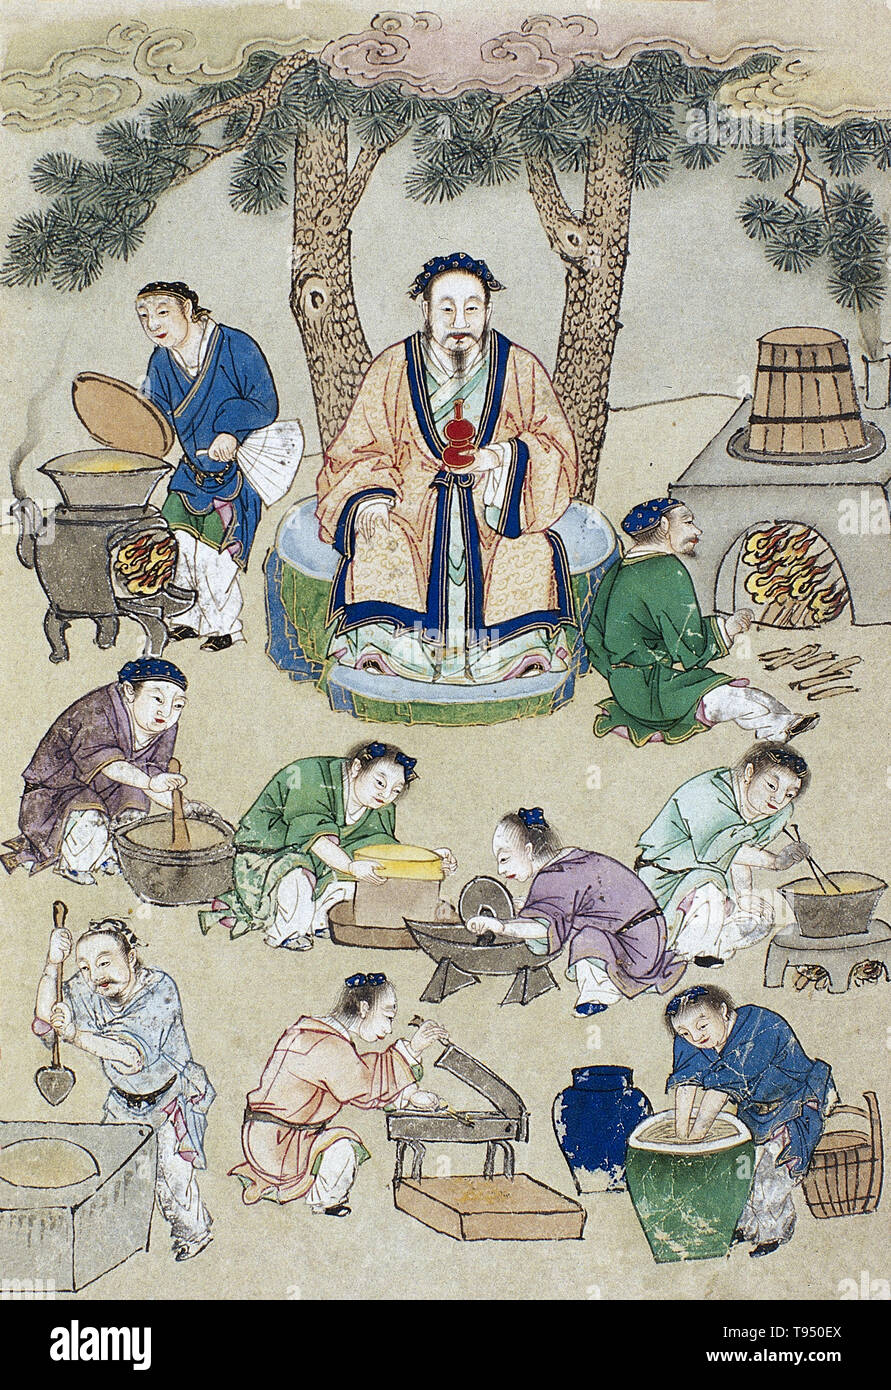 Lei Gong preparing medicines, from Buyi Lei Gong paozhi bianlan (Supplement to Lei Gong's Guide to the Preparation of Drugs), edition of 1591. Lei Gong is shown teaching humankind how to prepare drugs. We see him seated in the center of the composition, holding a medicine gourd in his left hand, in front of a backdrop of pine trees and auspicious cloud formations. The rest of the picture shows typical scenes of drug preparation in antiquity. Stock Photo